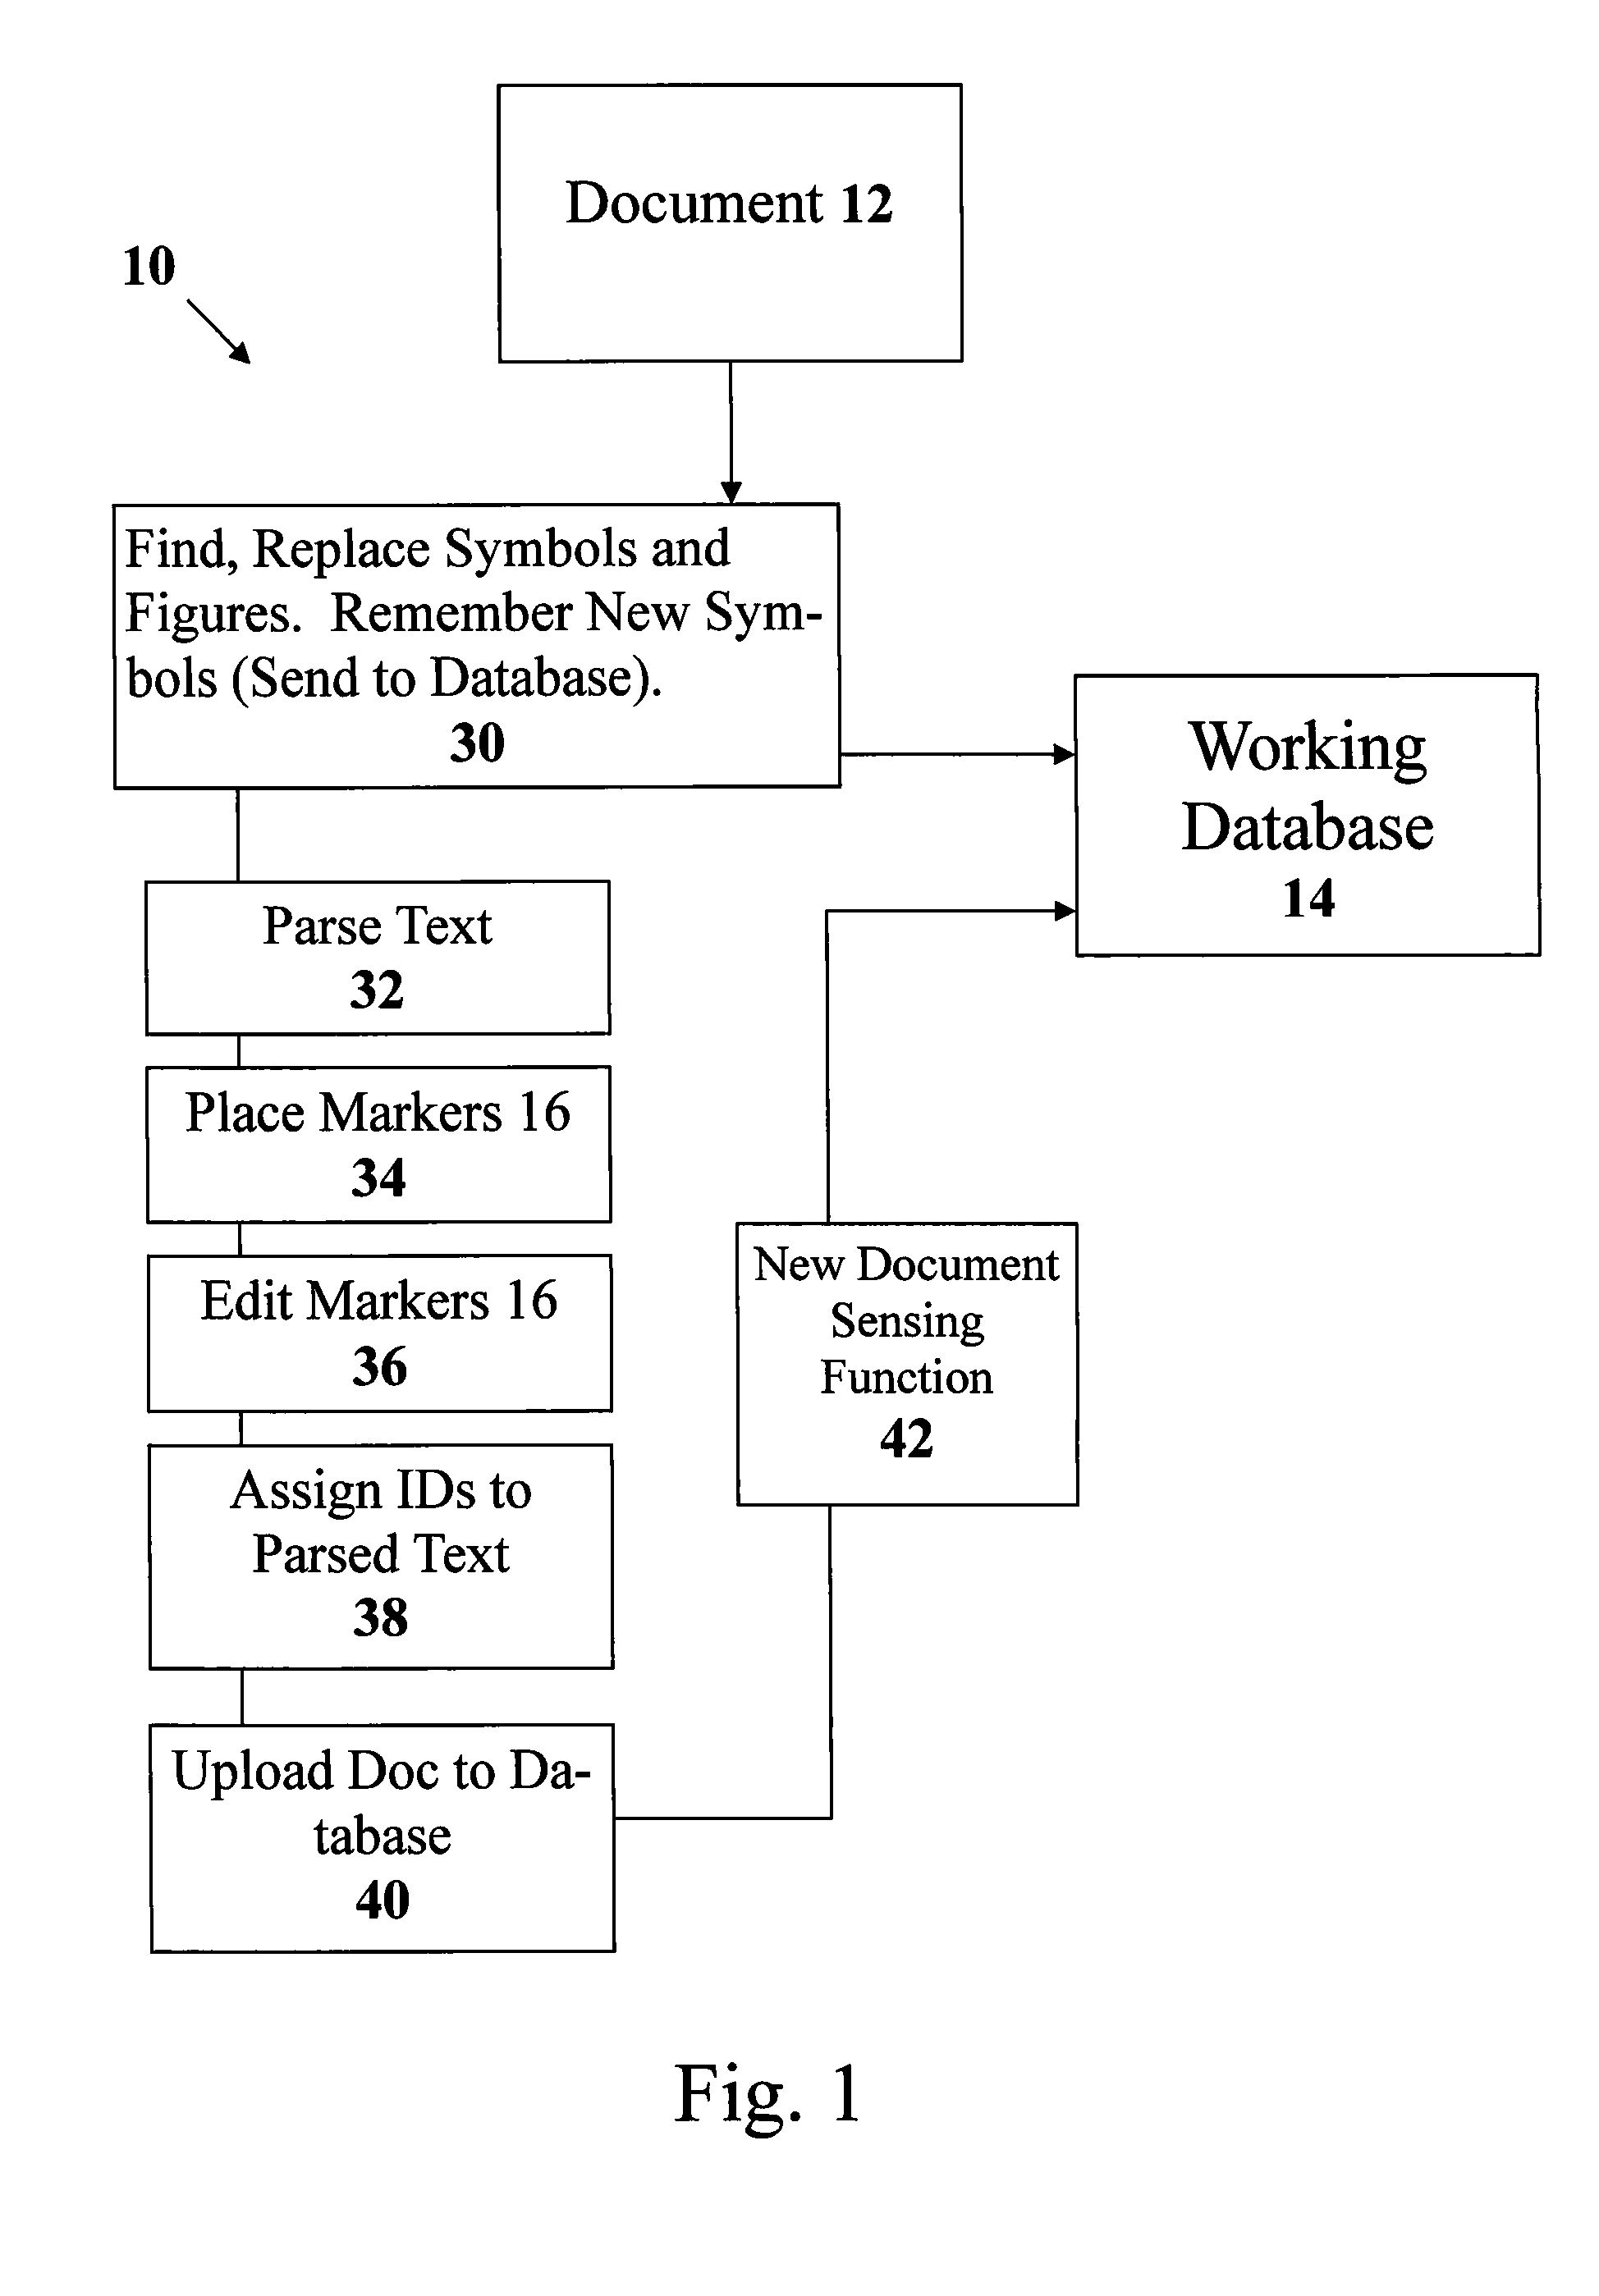 Document creation, linking, and maintenance system